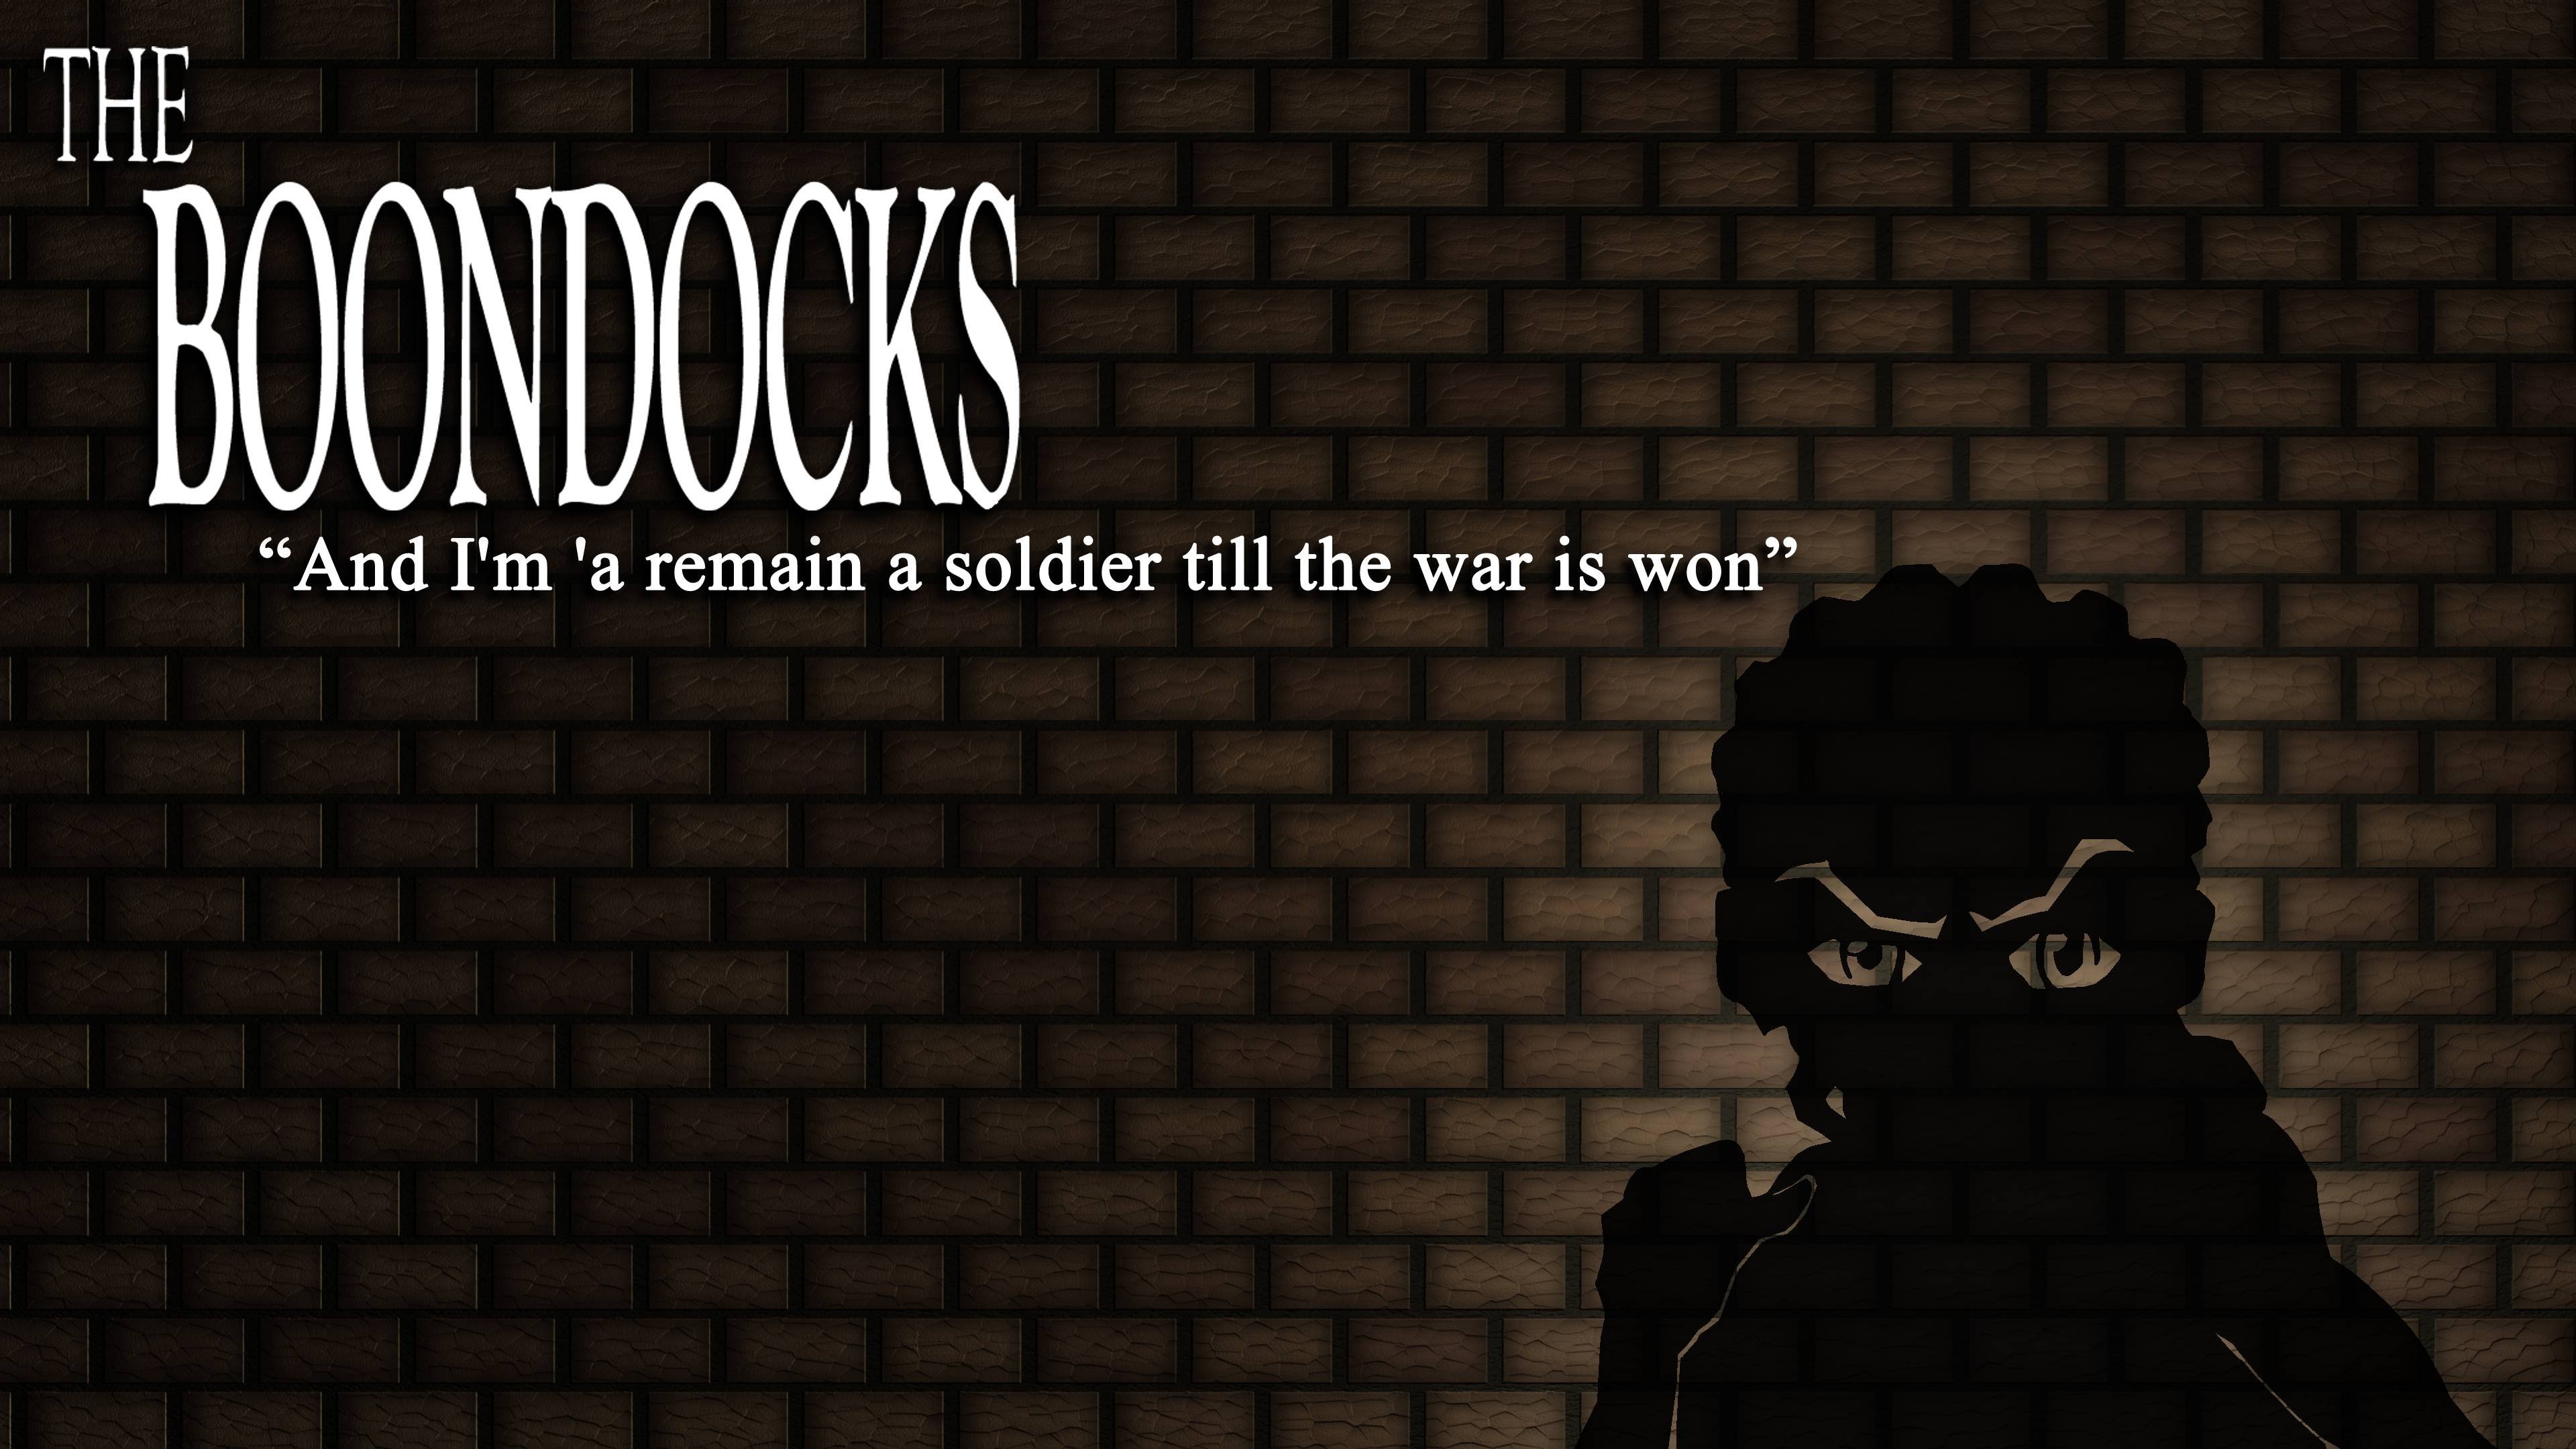 The boondocks wallpaper  180585  High Quality and Resolution 